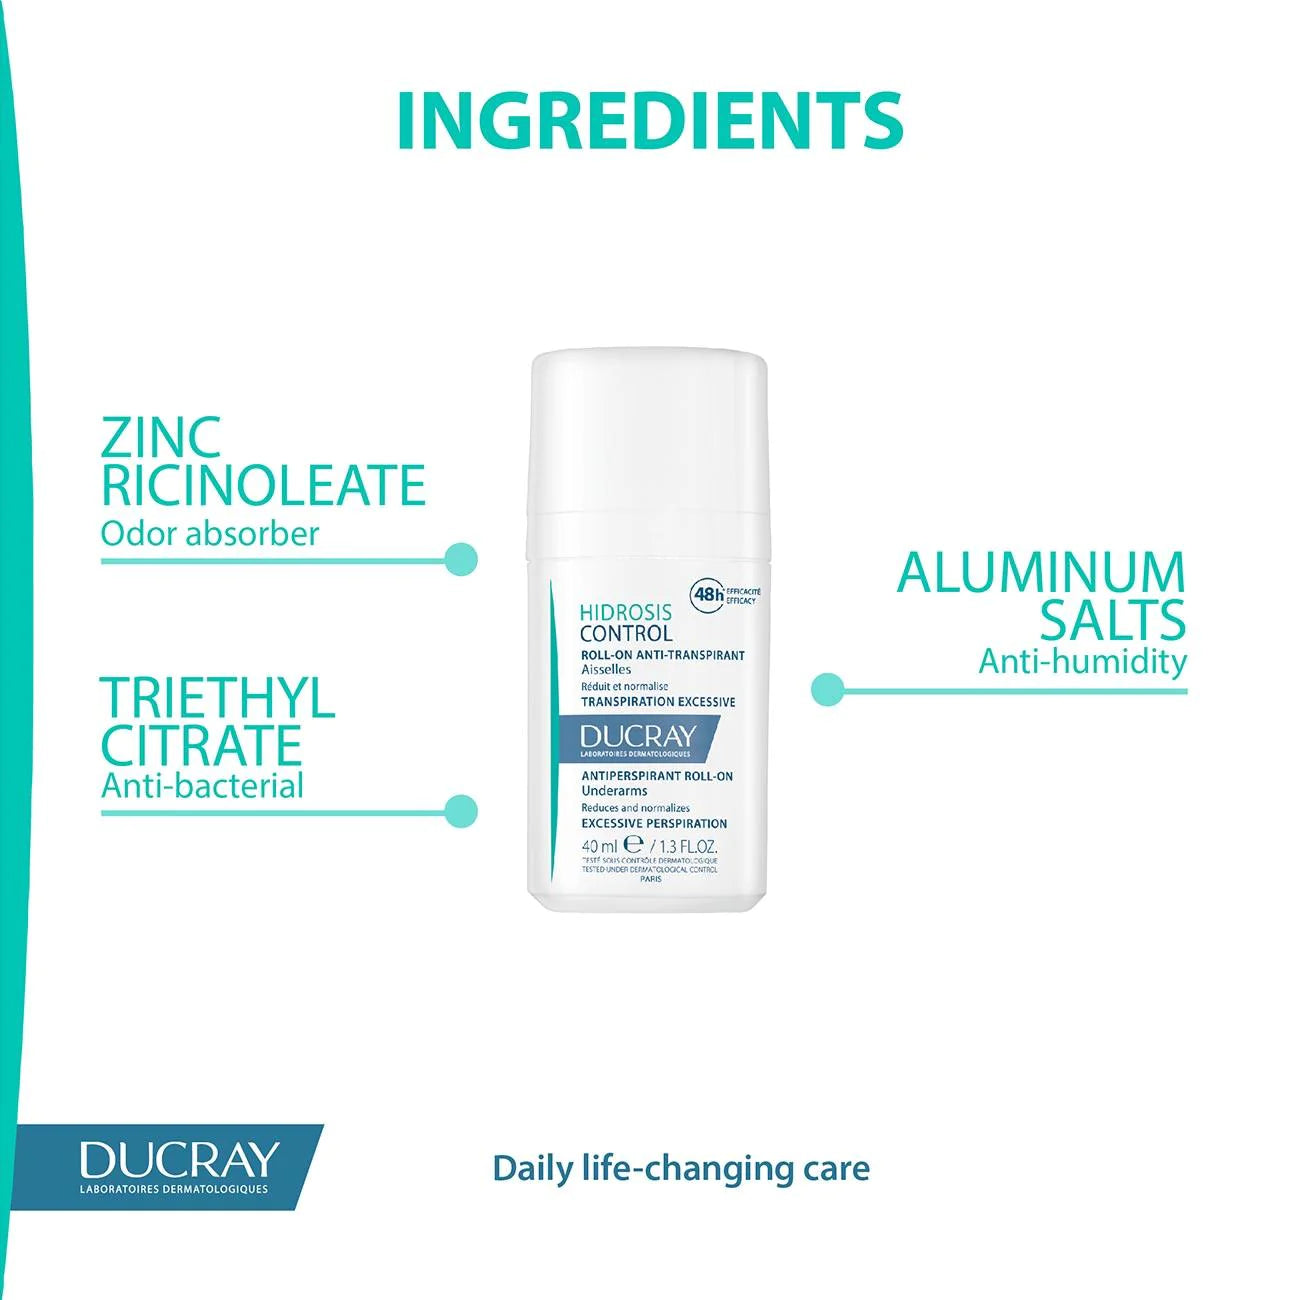 DUCRAY Hidrosis Control Antiperspirant Roll-On 48H Efficacy - Underarms